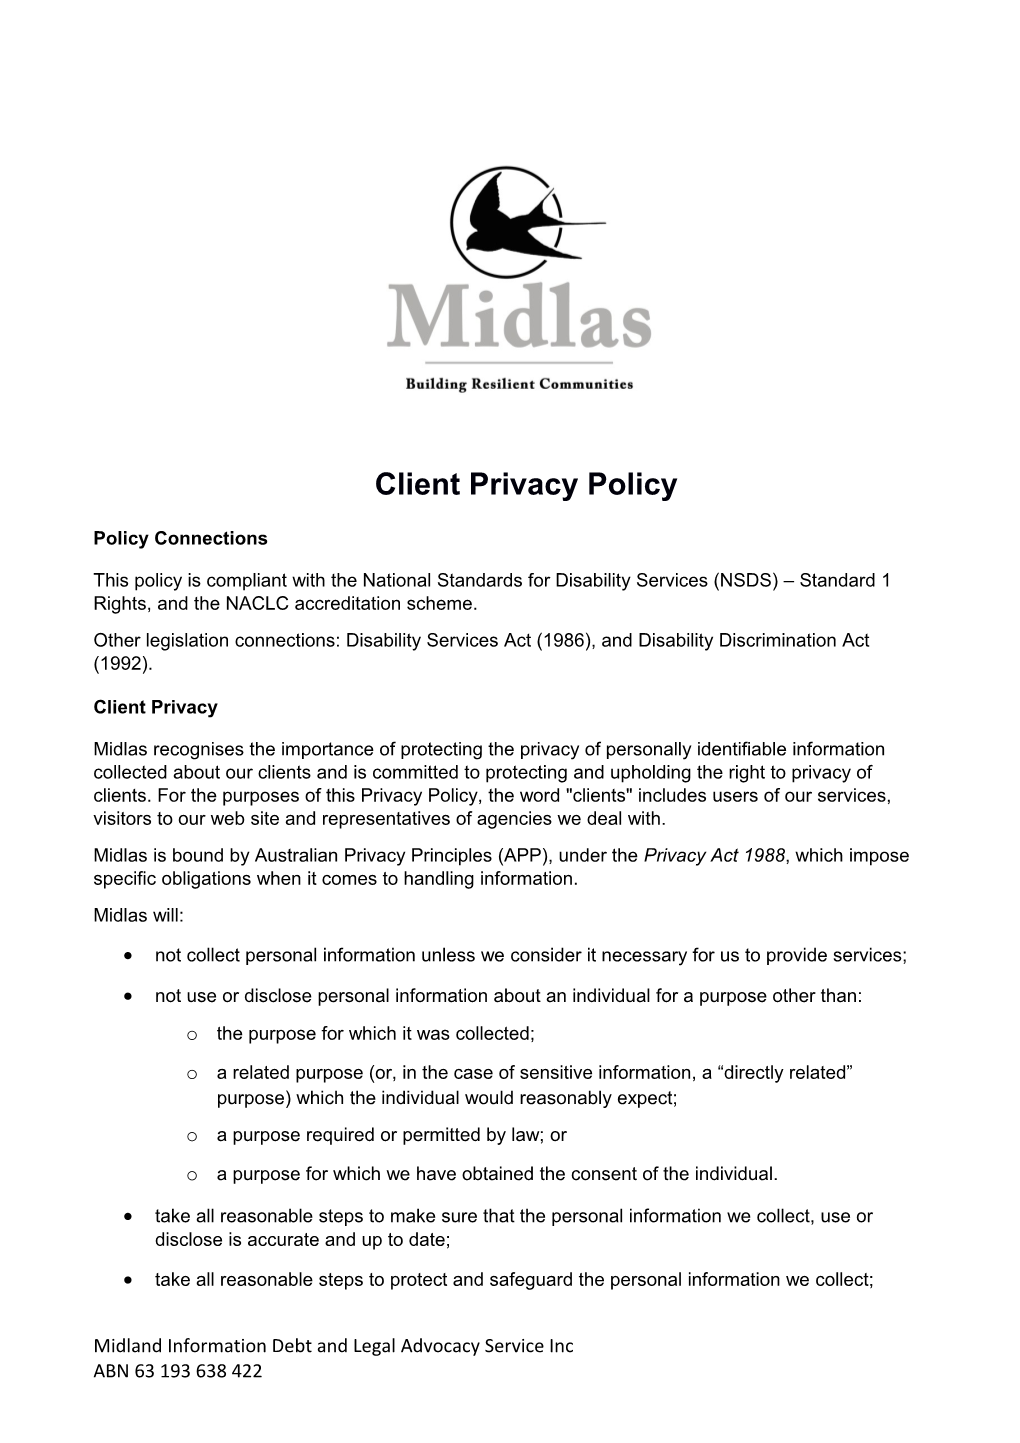 Client Privacy Policy